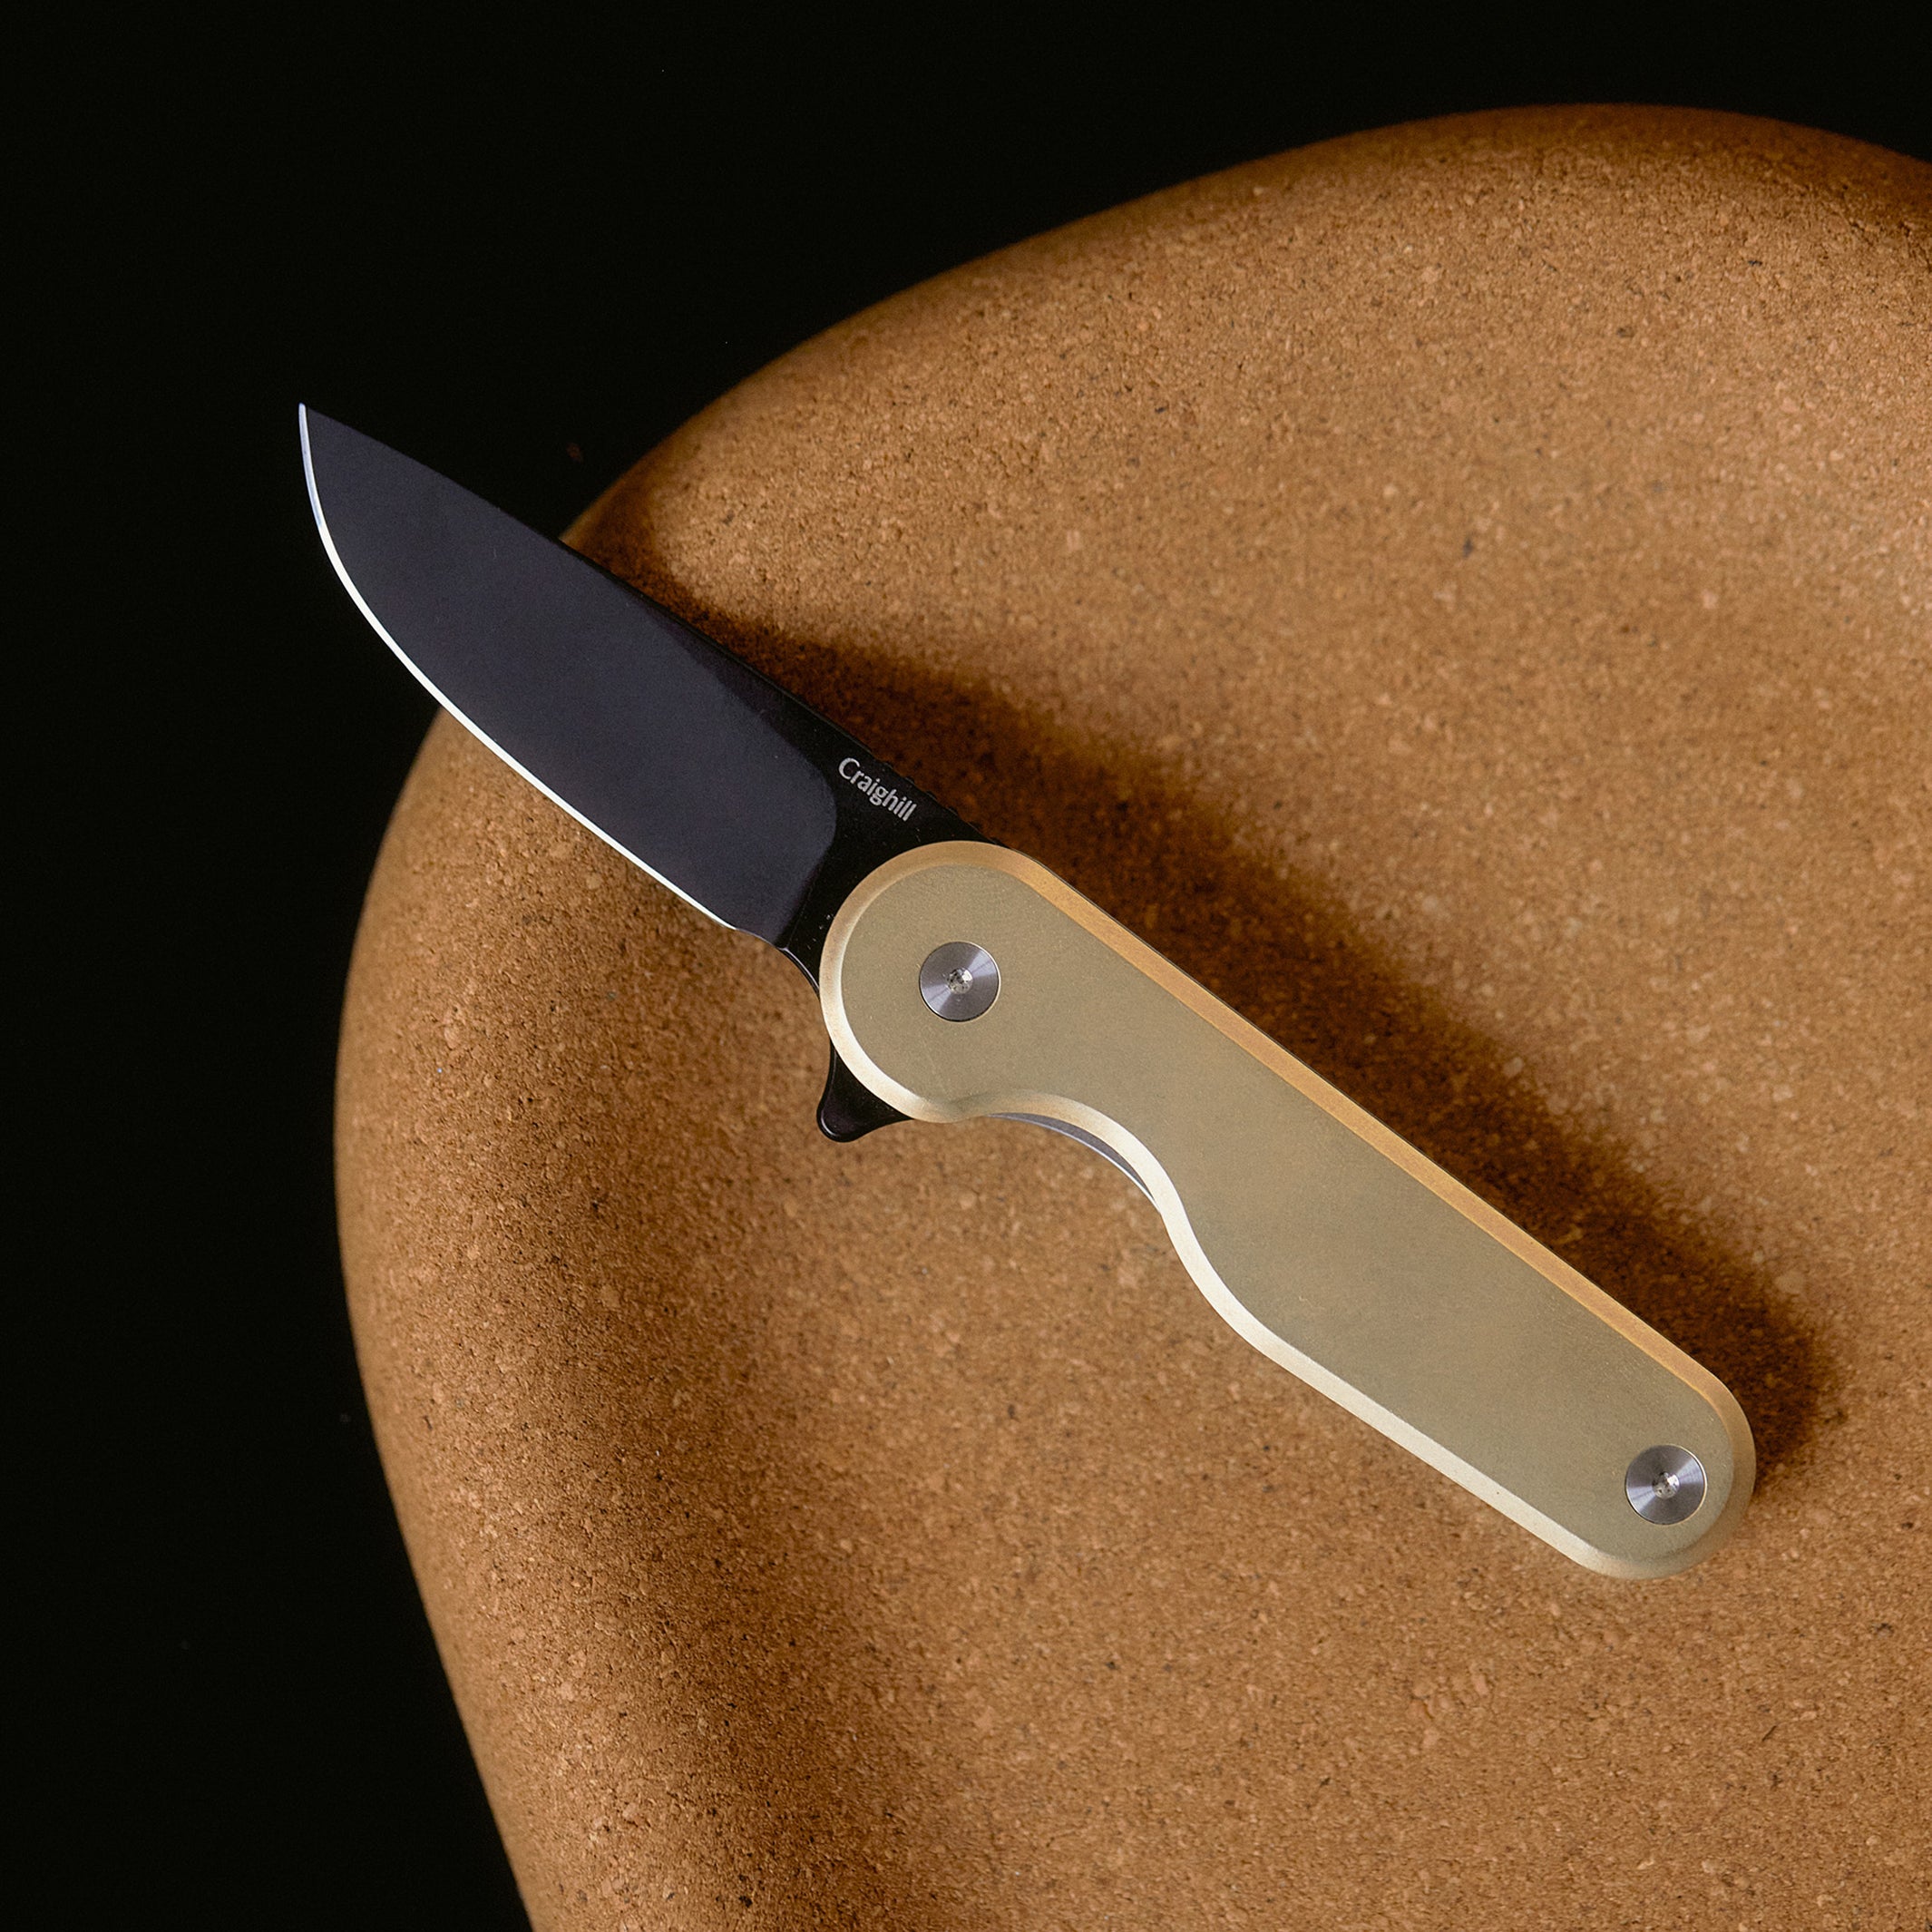 Rook Knife – Craighill